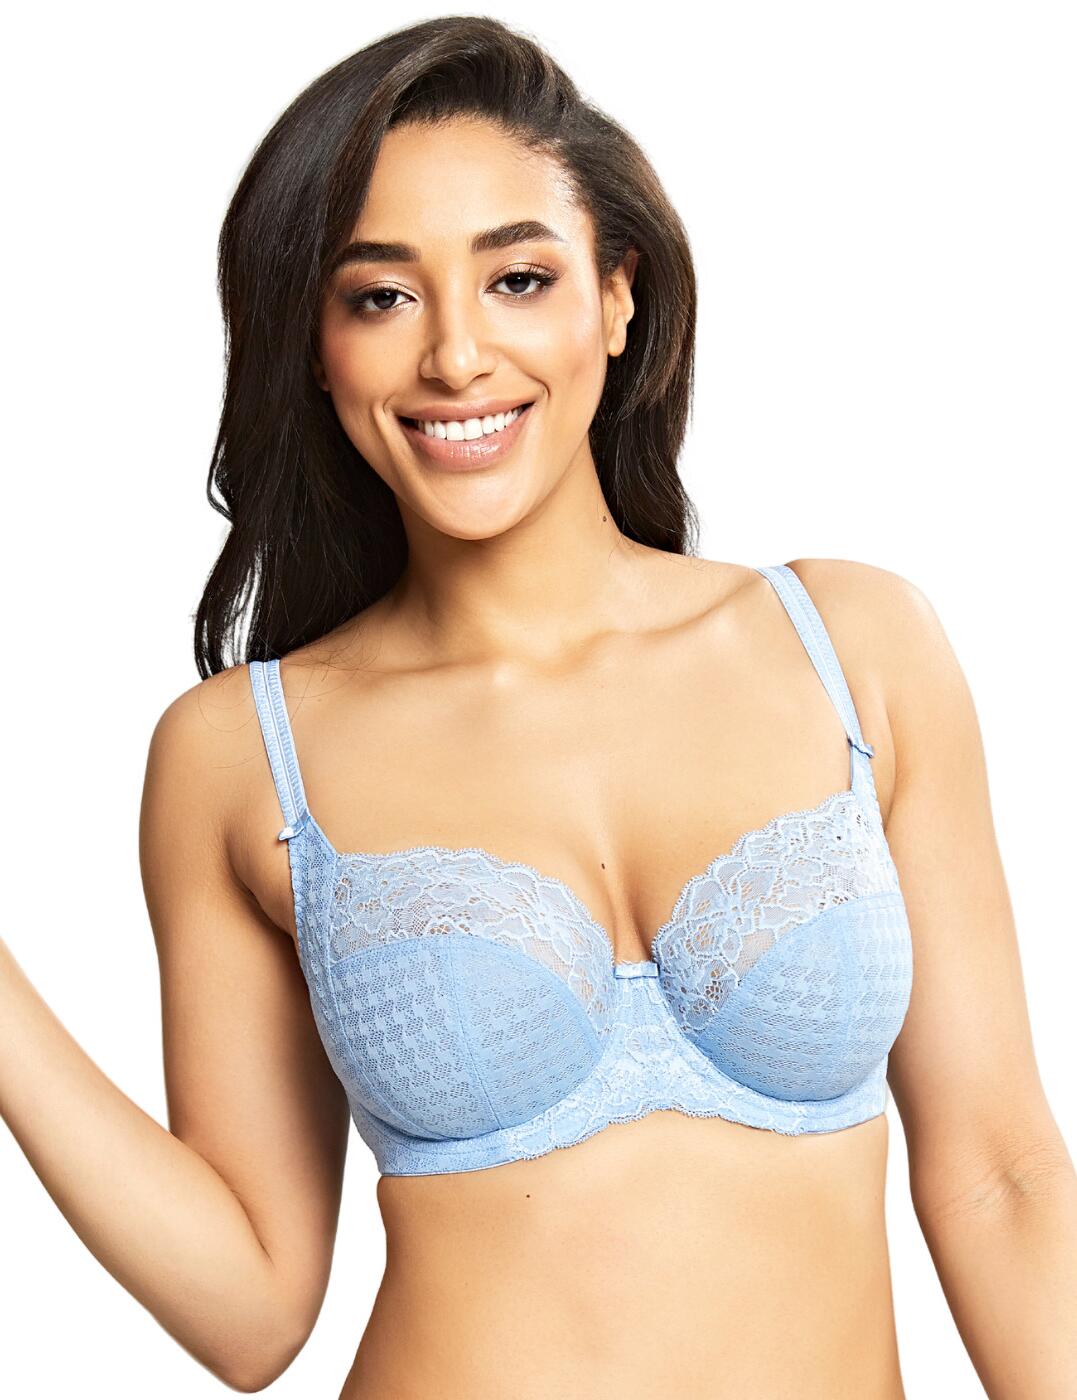 Panache Envy Full Cup Bra 7285 Underwired Non-Padded Comfortable Bras